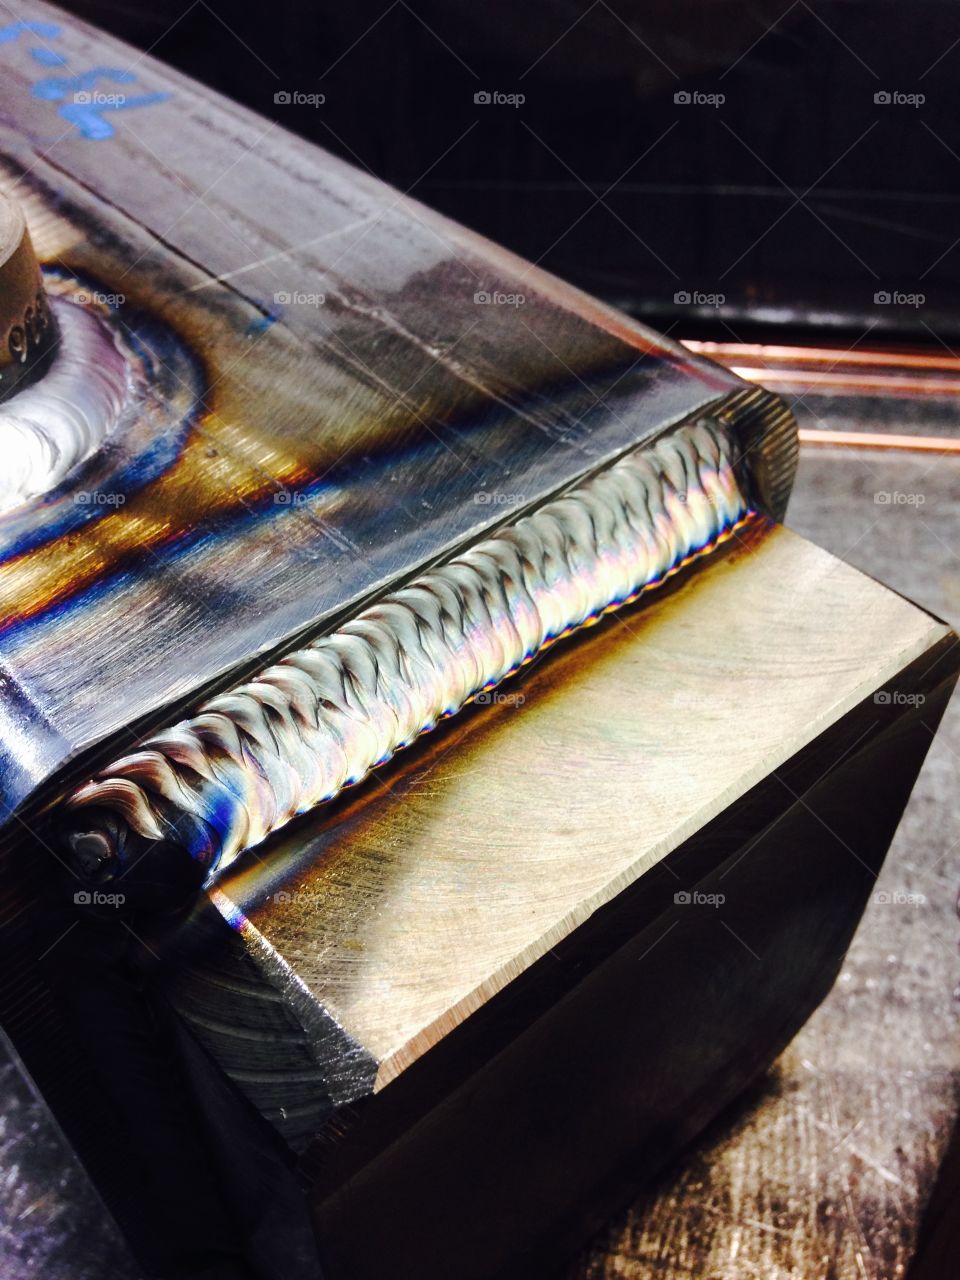 Welds capturing the colors in heated metal